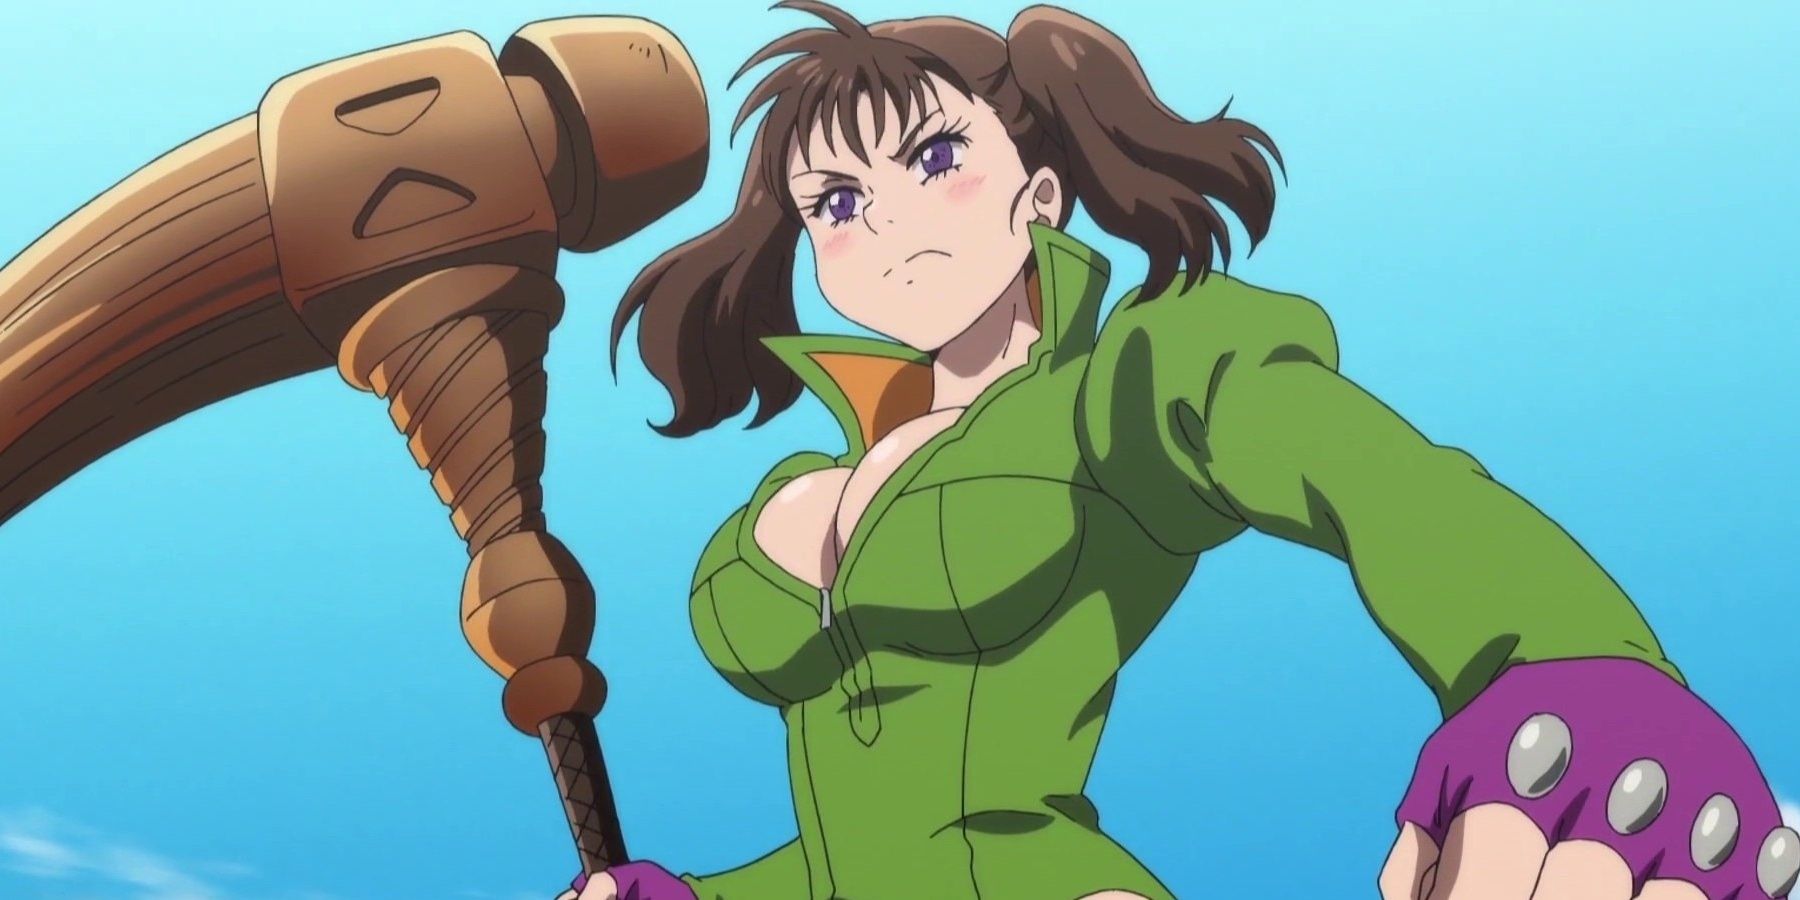 diane looking determined in the seven deadly sins